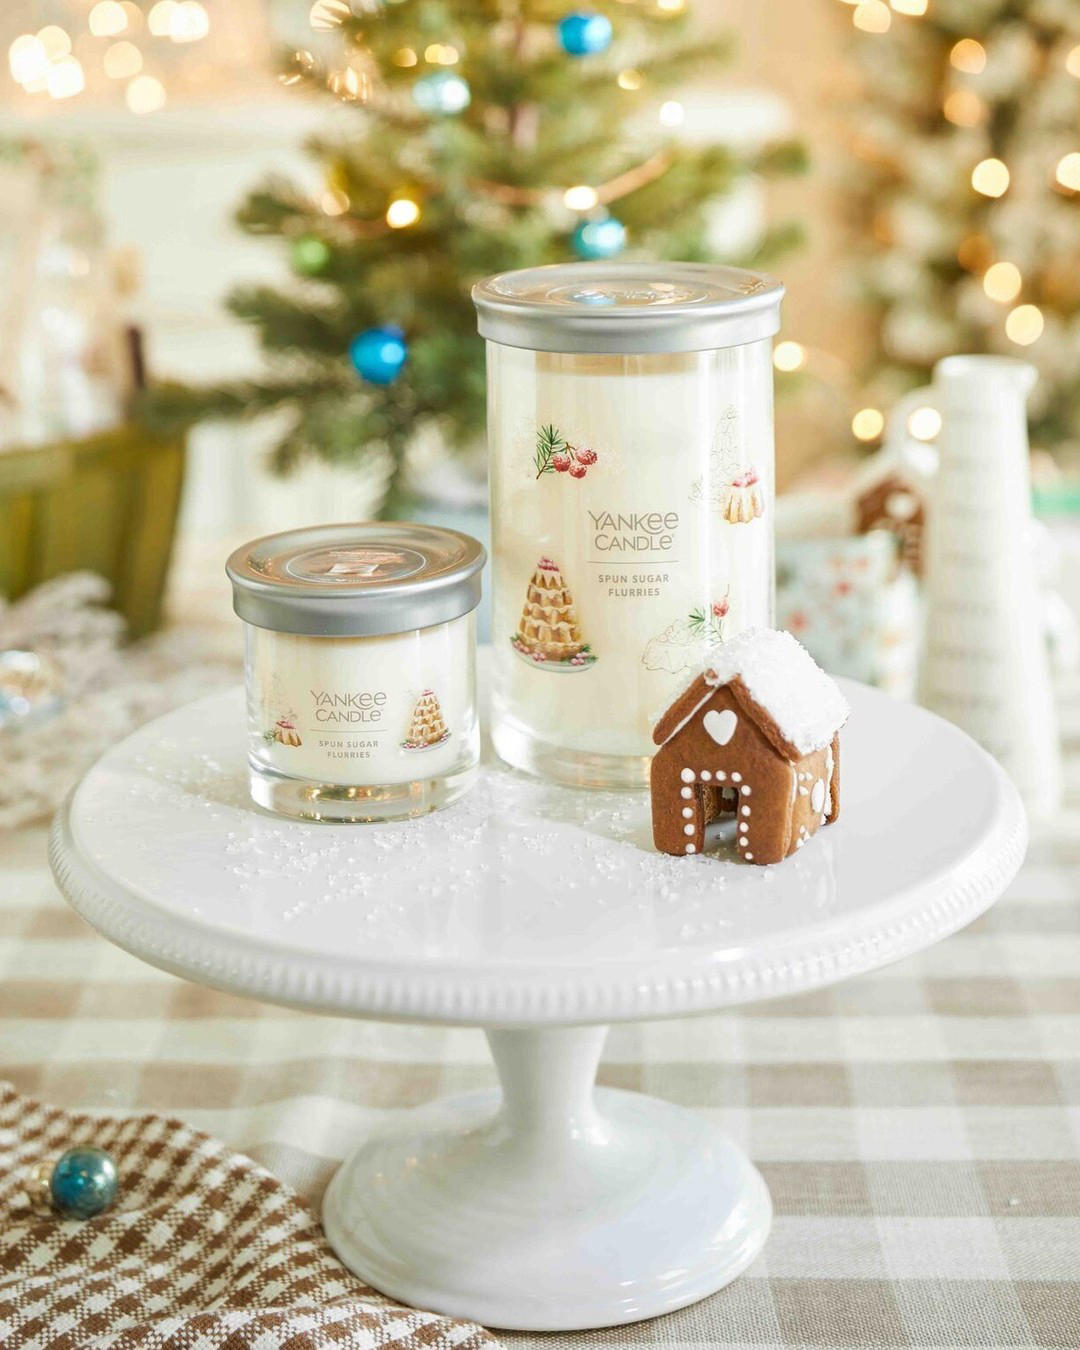 Yankee Candle - What's cuter than a gingerbread house